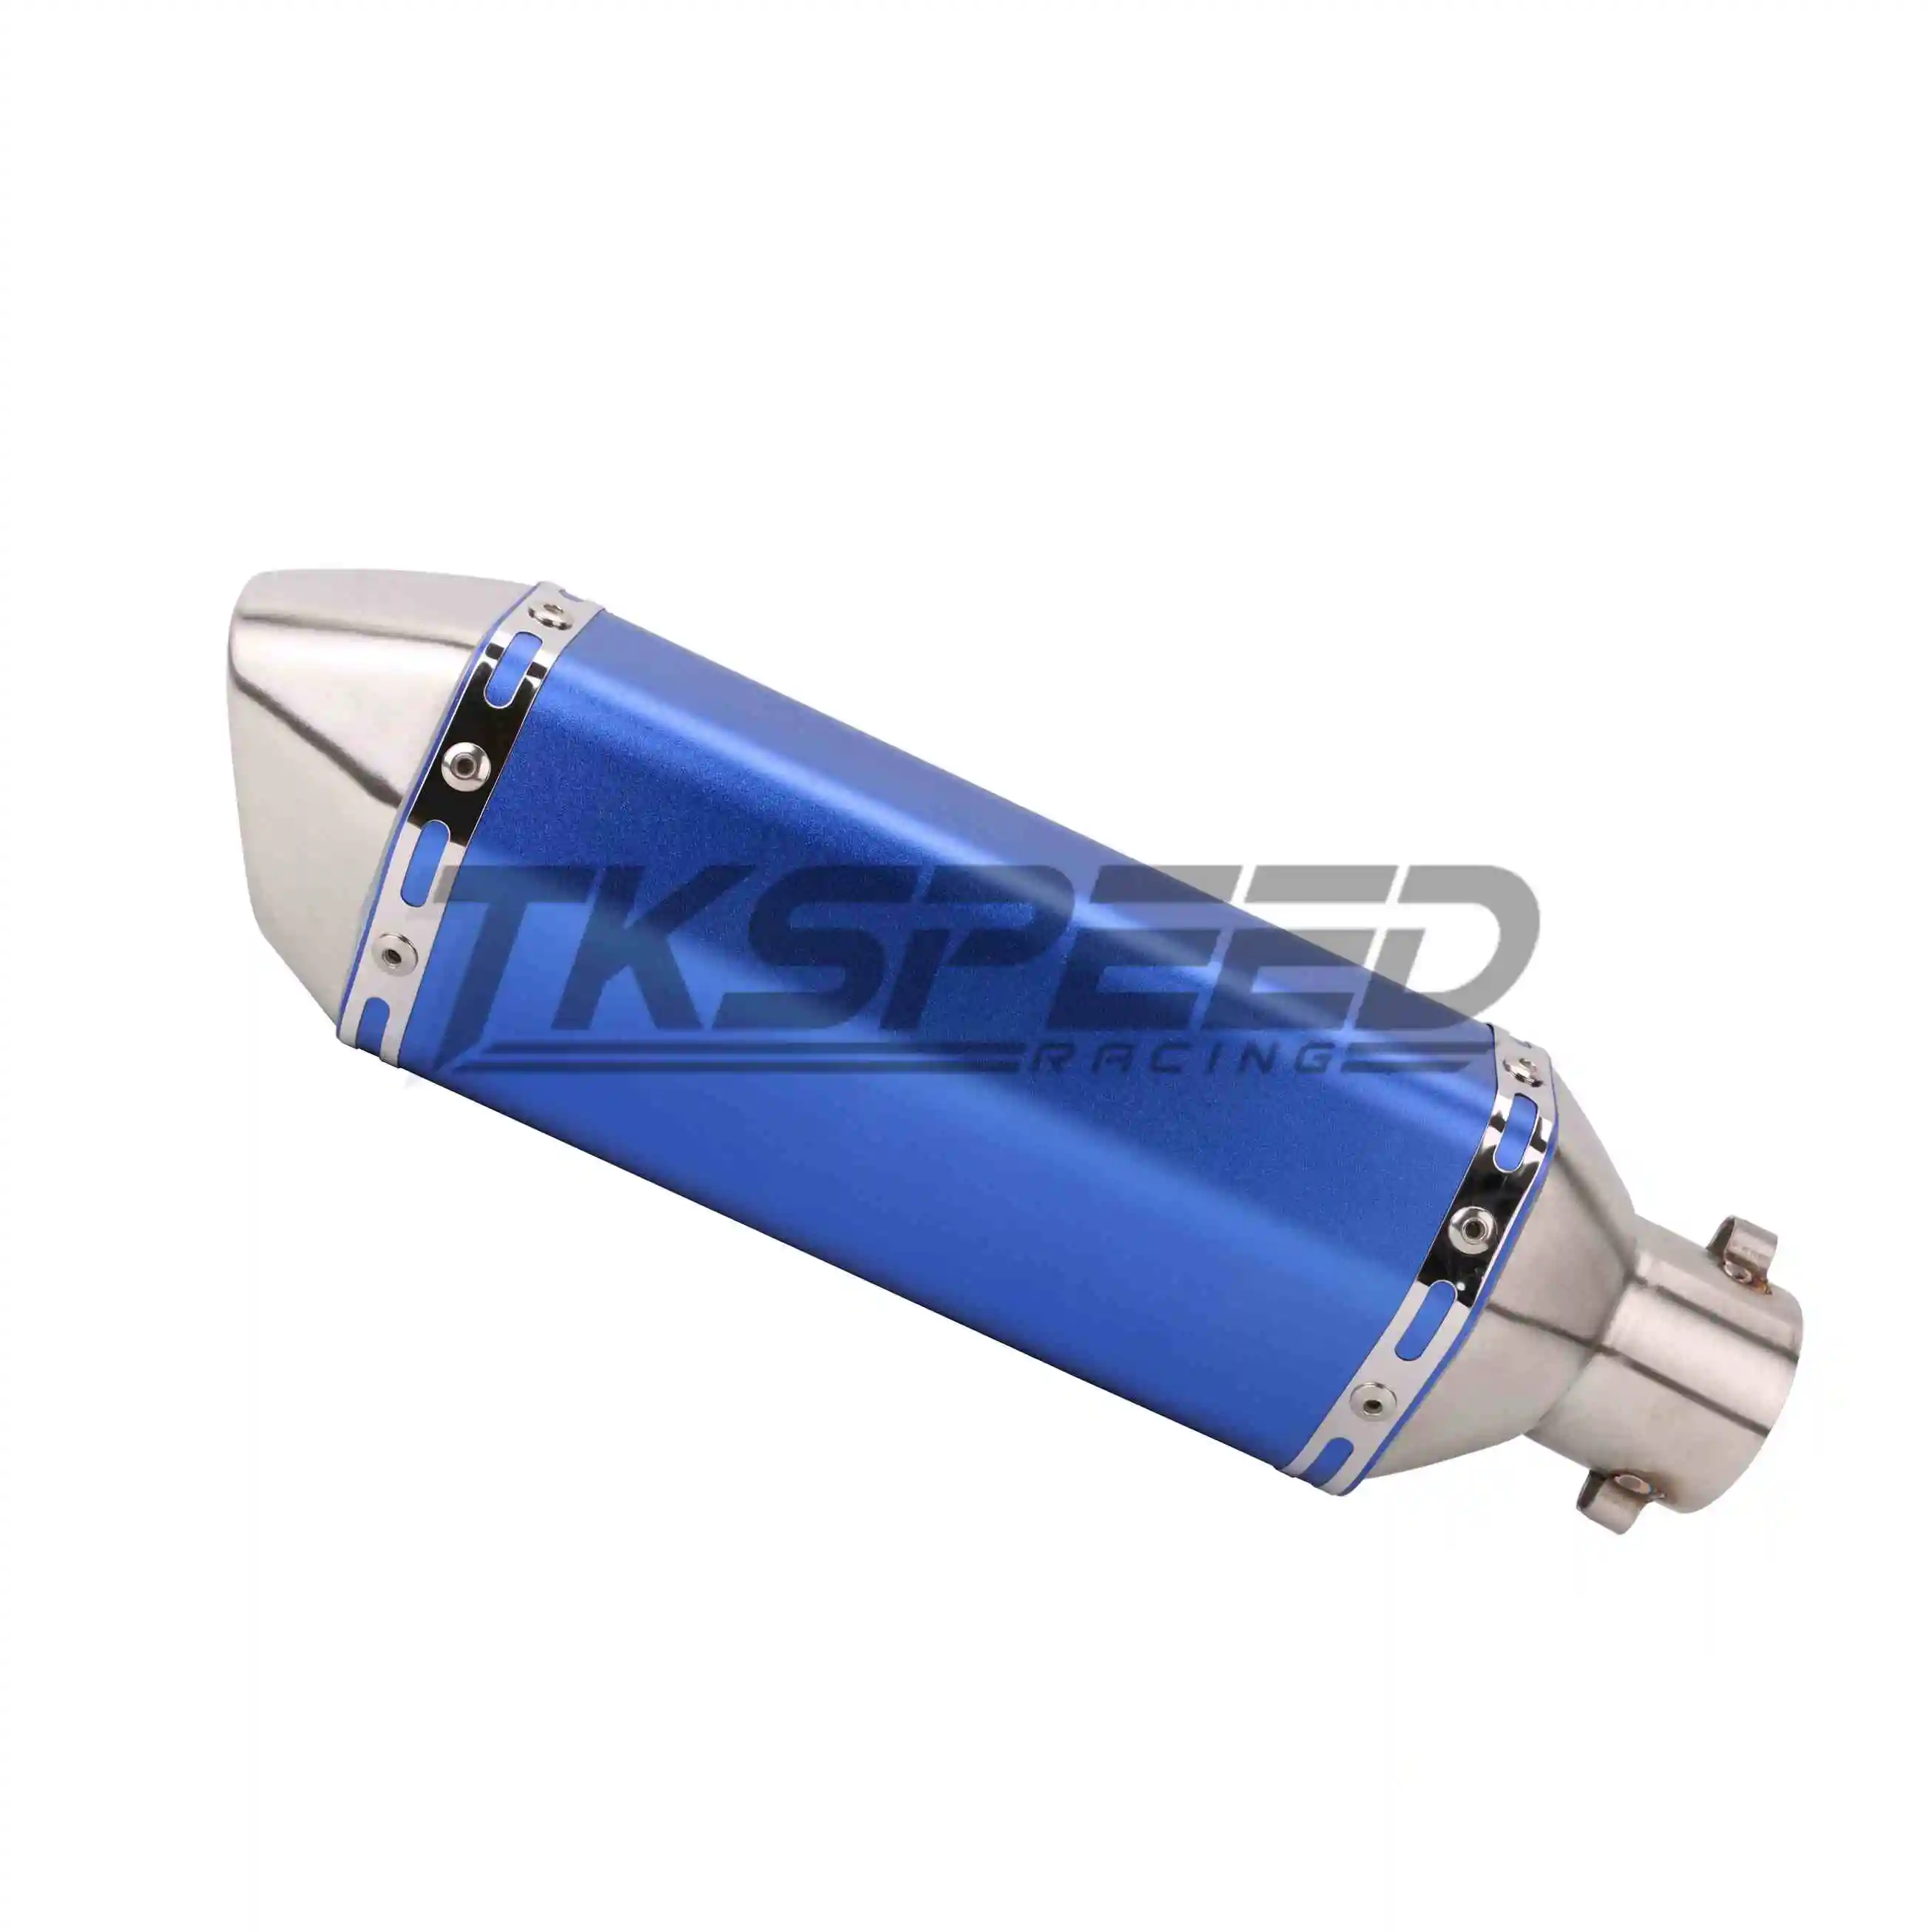 51mm universal Motorcycle Modified Exhaust pipe Muffler Exhaust scooter For CBR125 CBR250 CB400 CB600 YZF FZ400 Z750 - Цвет: blue pipe